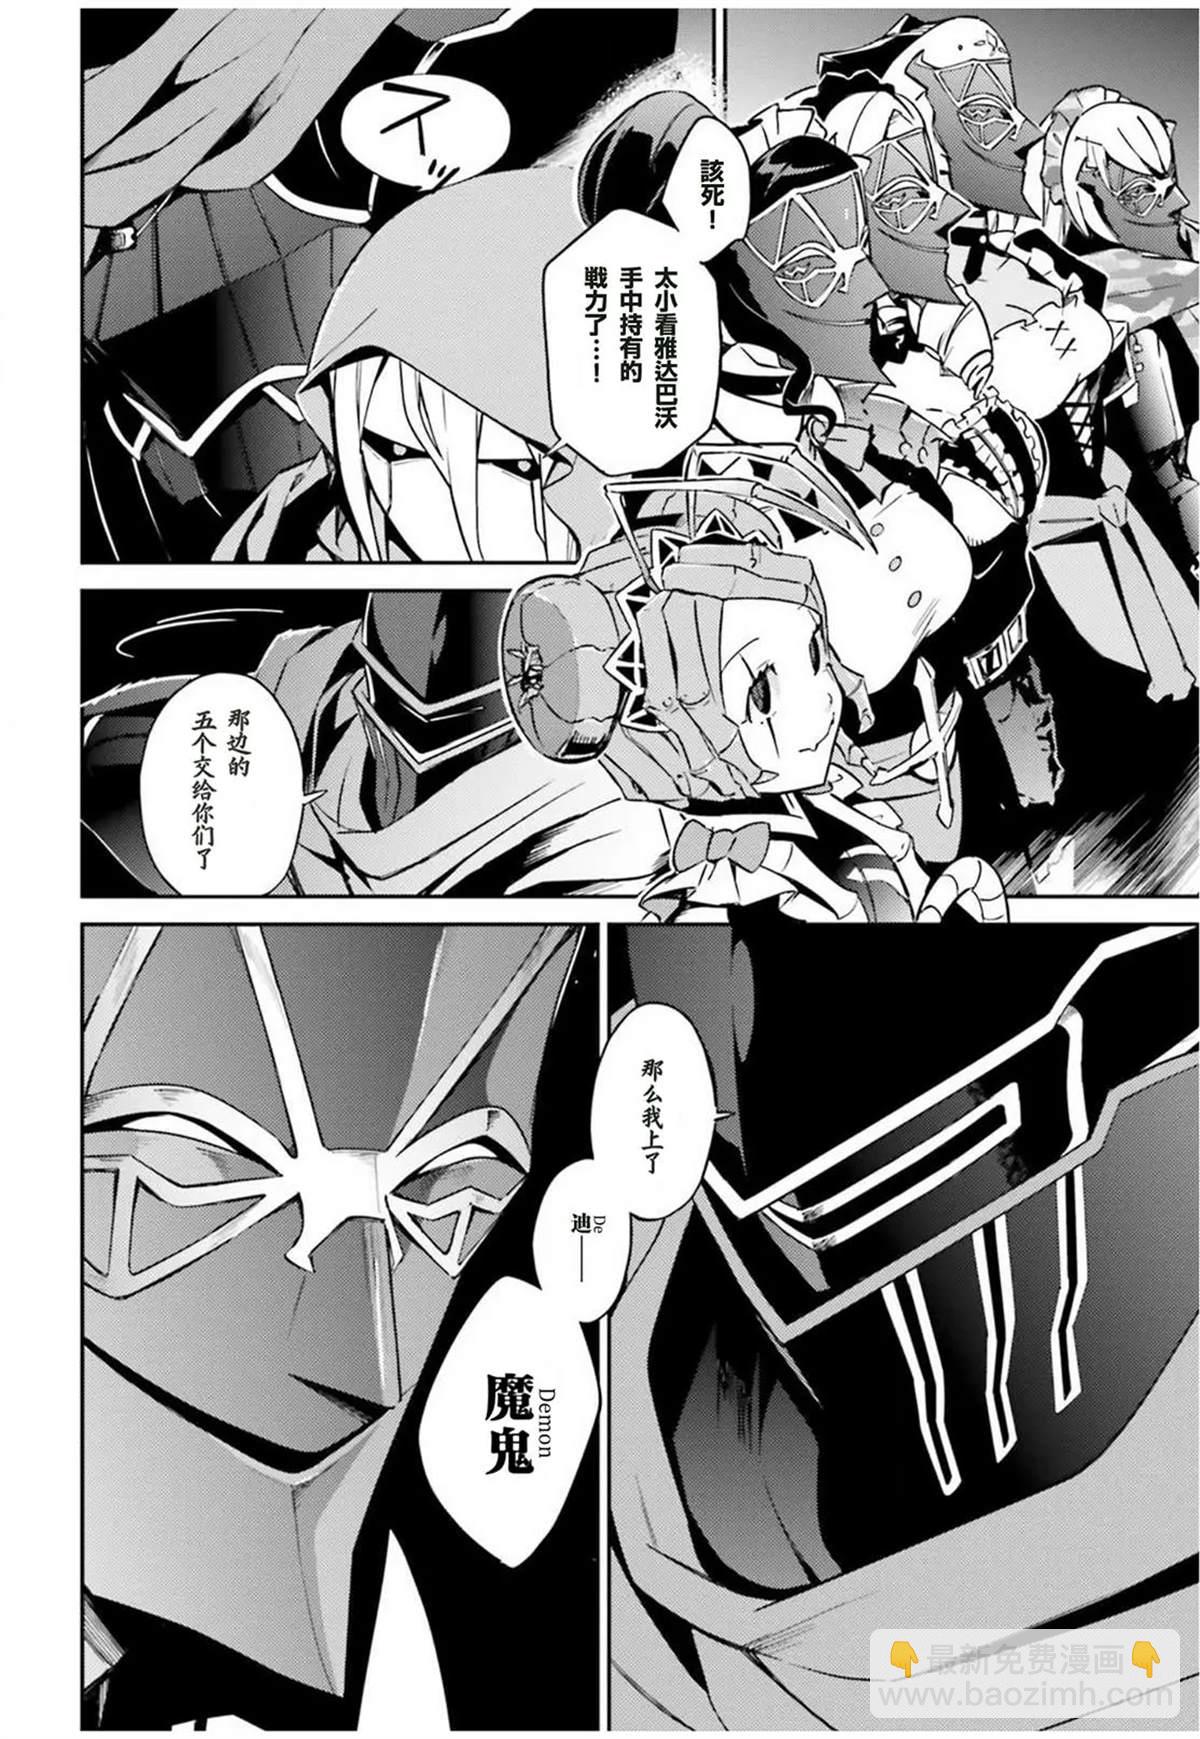 OVERLORD - 第50話 - 6